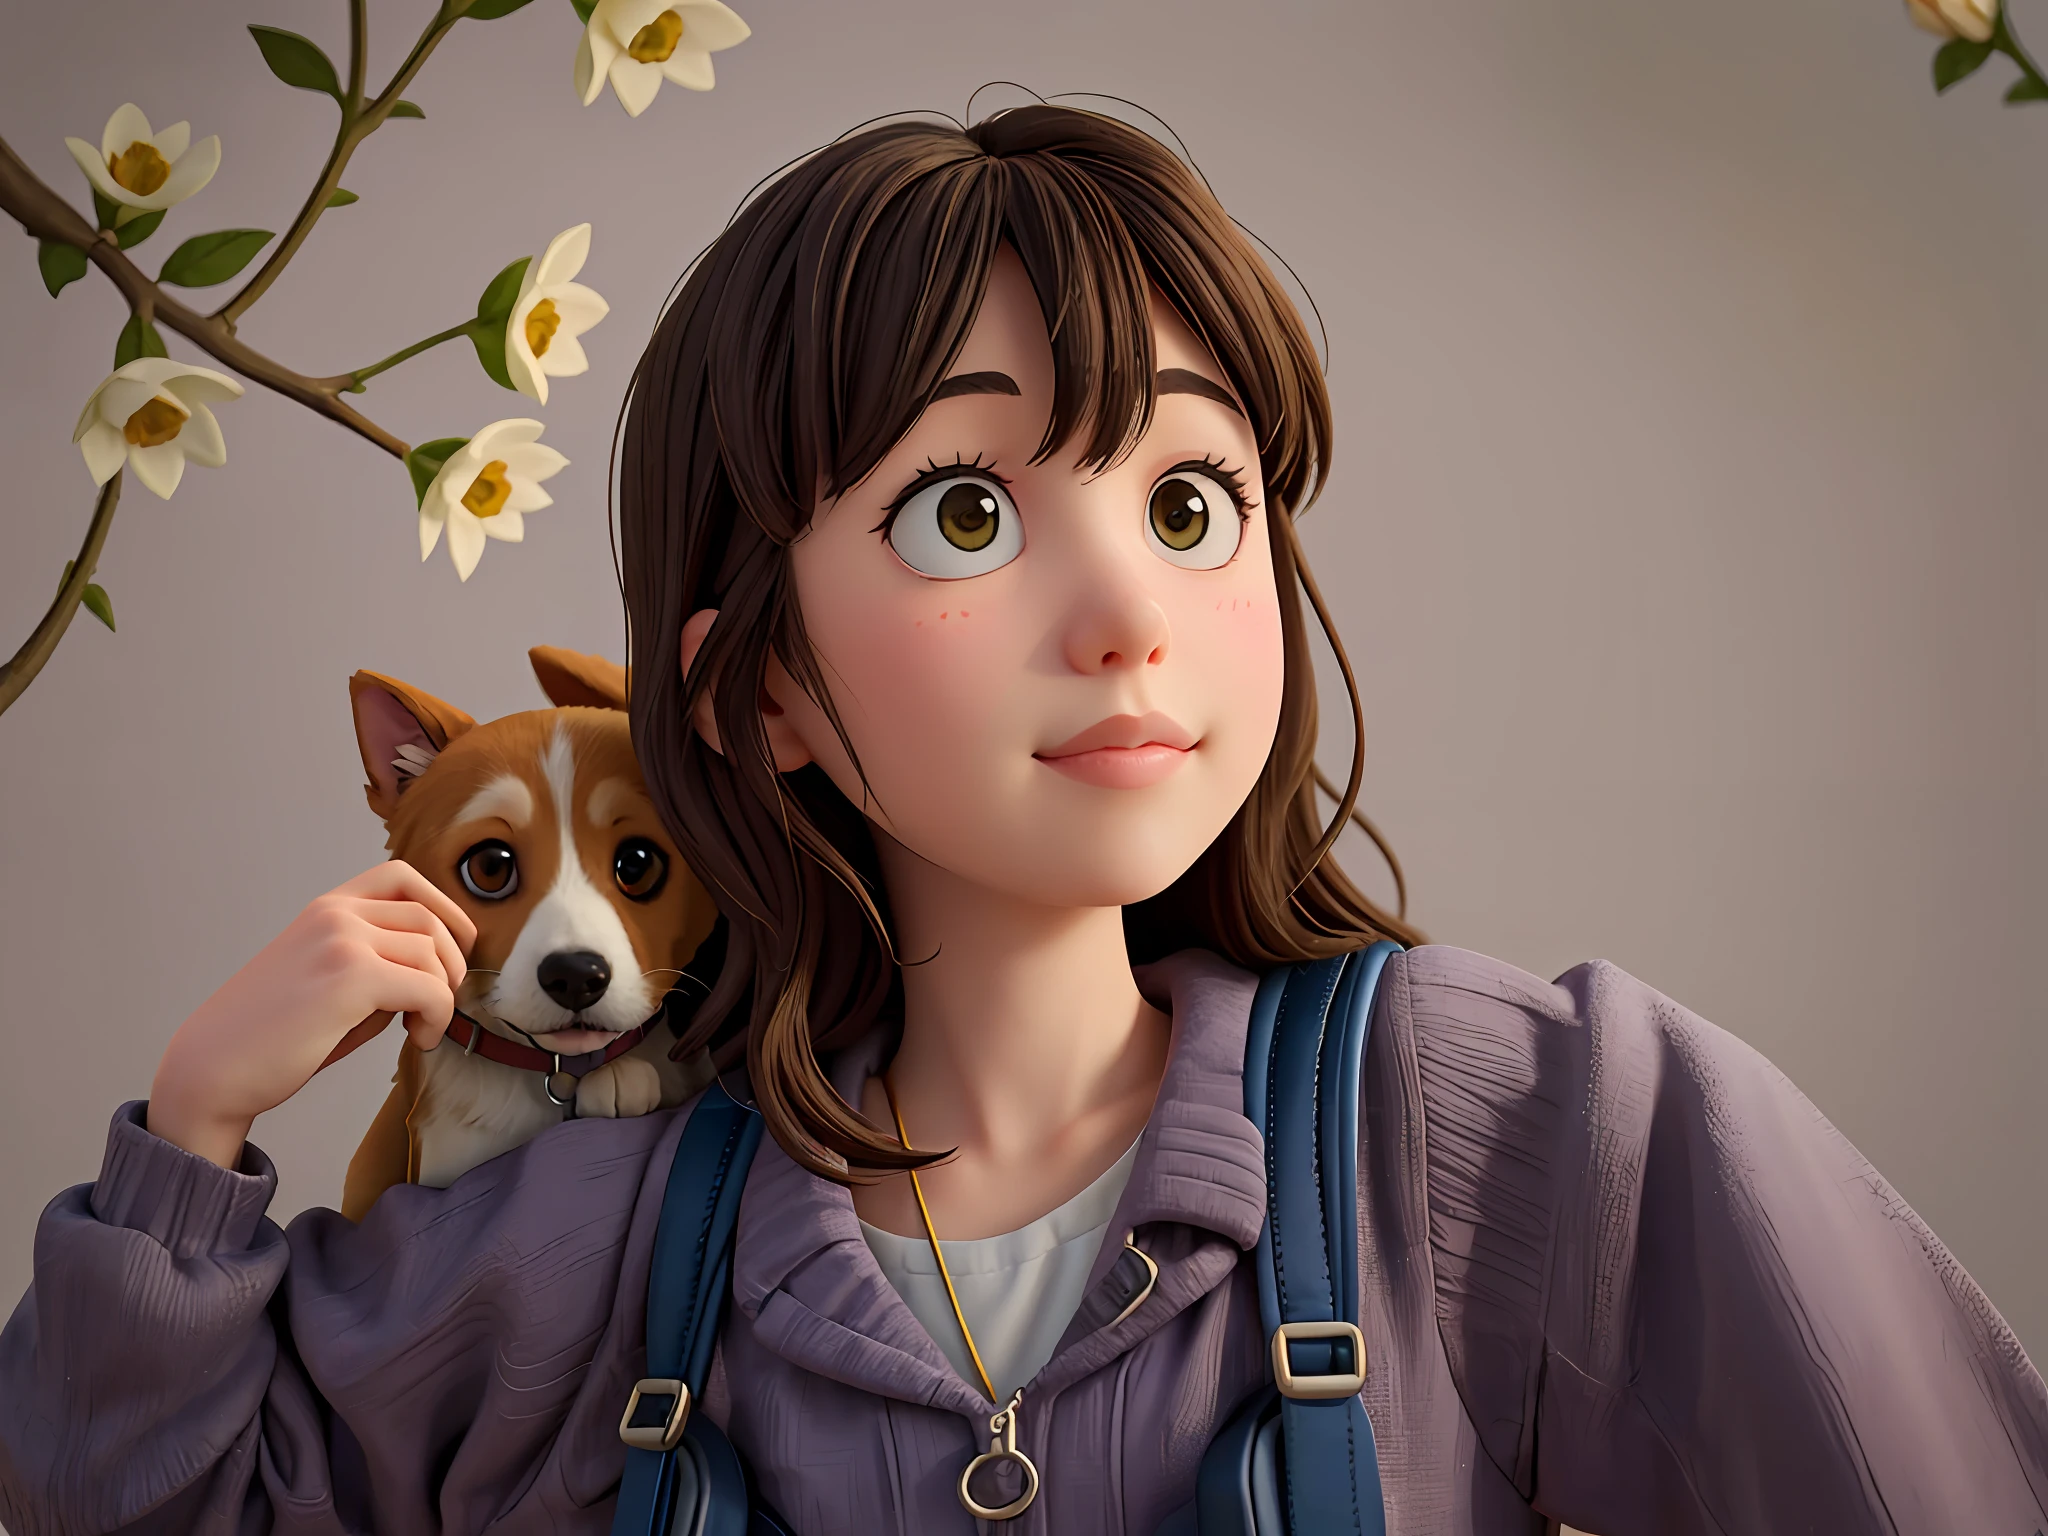 A very charming  with a backpack and her cute border collie puppy enjoying a lovely spring outing surrounded by beautiful yellow flowers and nature. The illustration is a high-definition illustration in 4K resolution with highly detailed facial features and cartoon-style visuals.